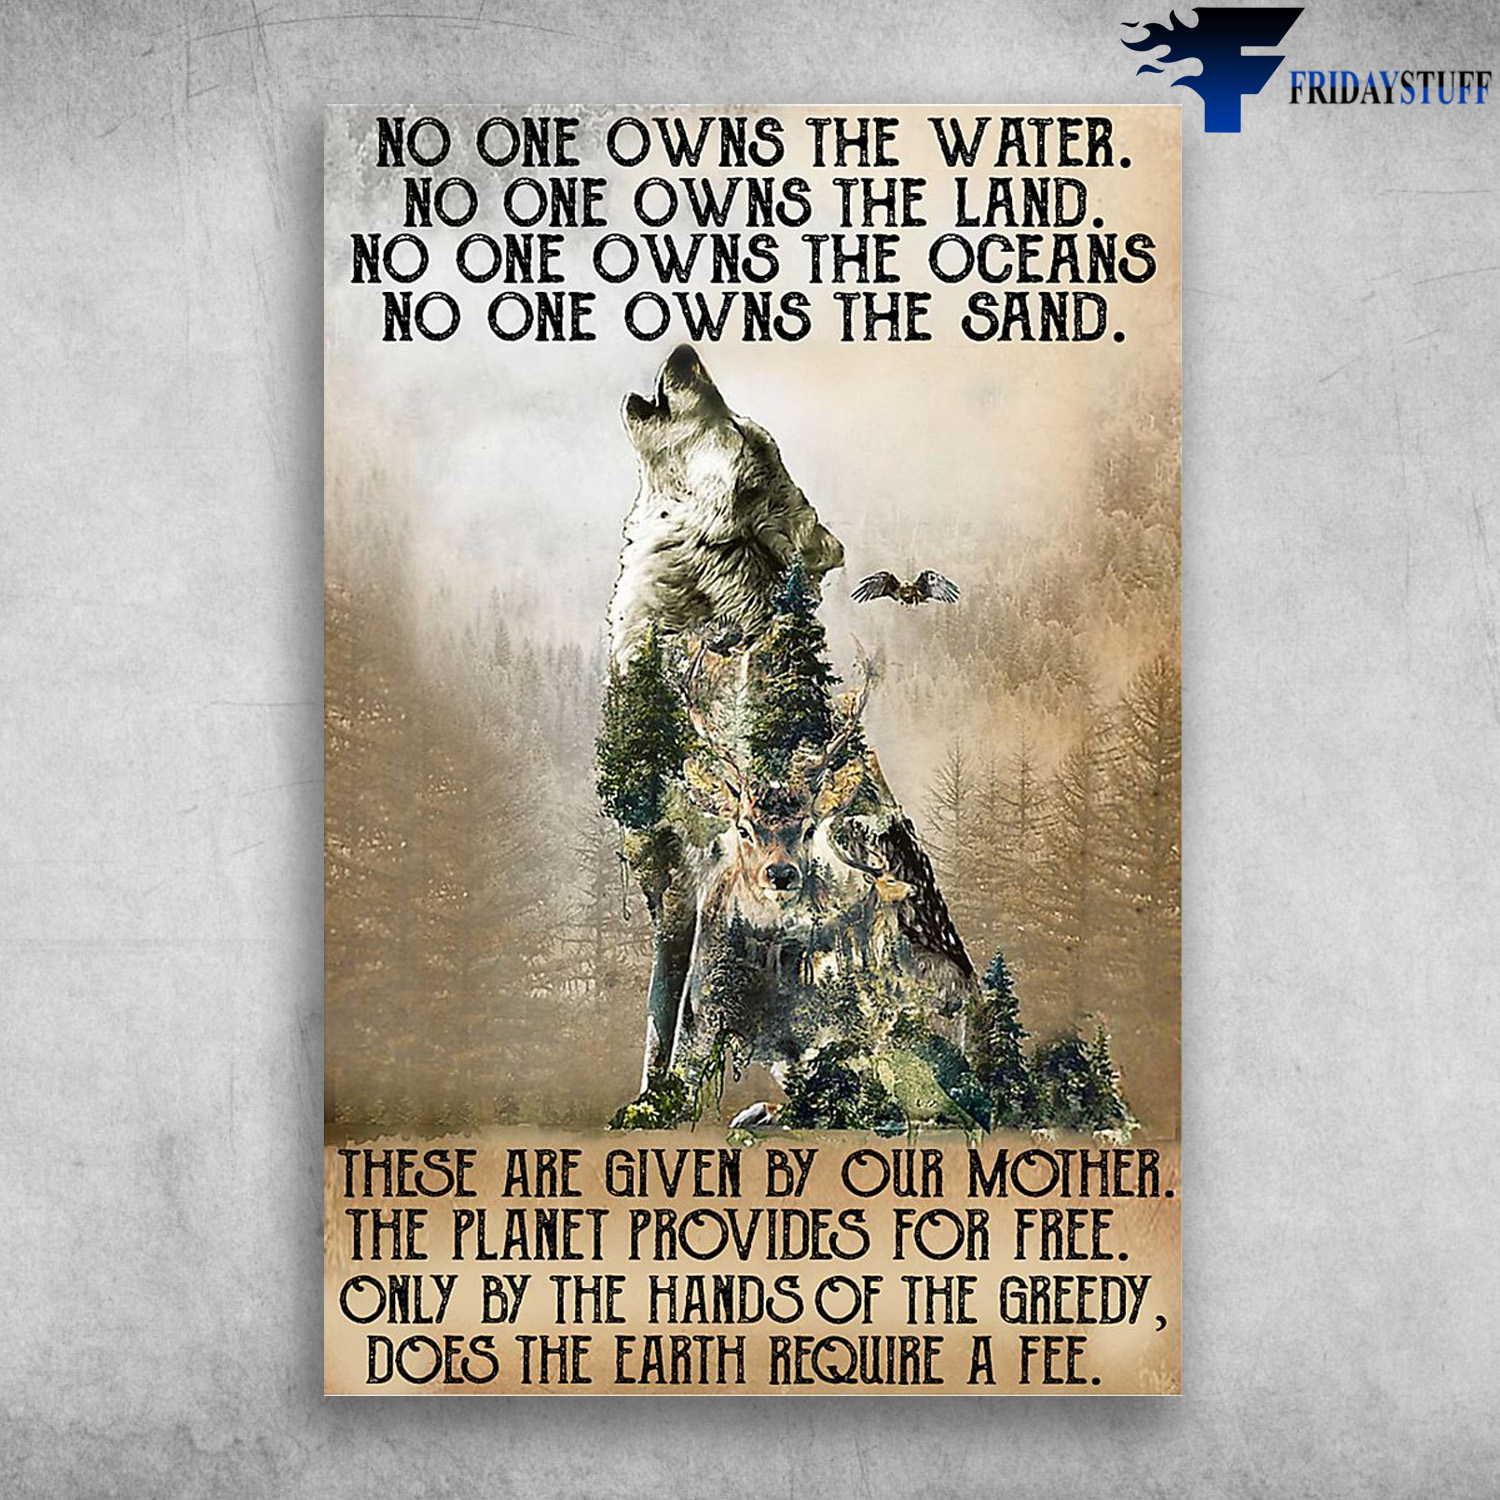 The Wolf - No One Owns The Water, No One Owns The Land, No One Owns The Oceans, No One Owns The Sand, These Are Given By Our Mother, The Planet Provides For Free, Only By The Hands Of The Greedy, Does The Earth Require A Fee